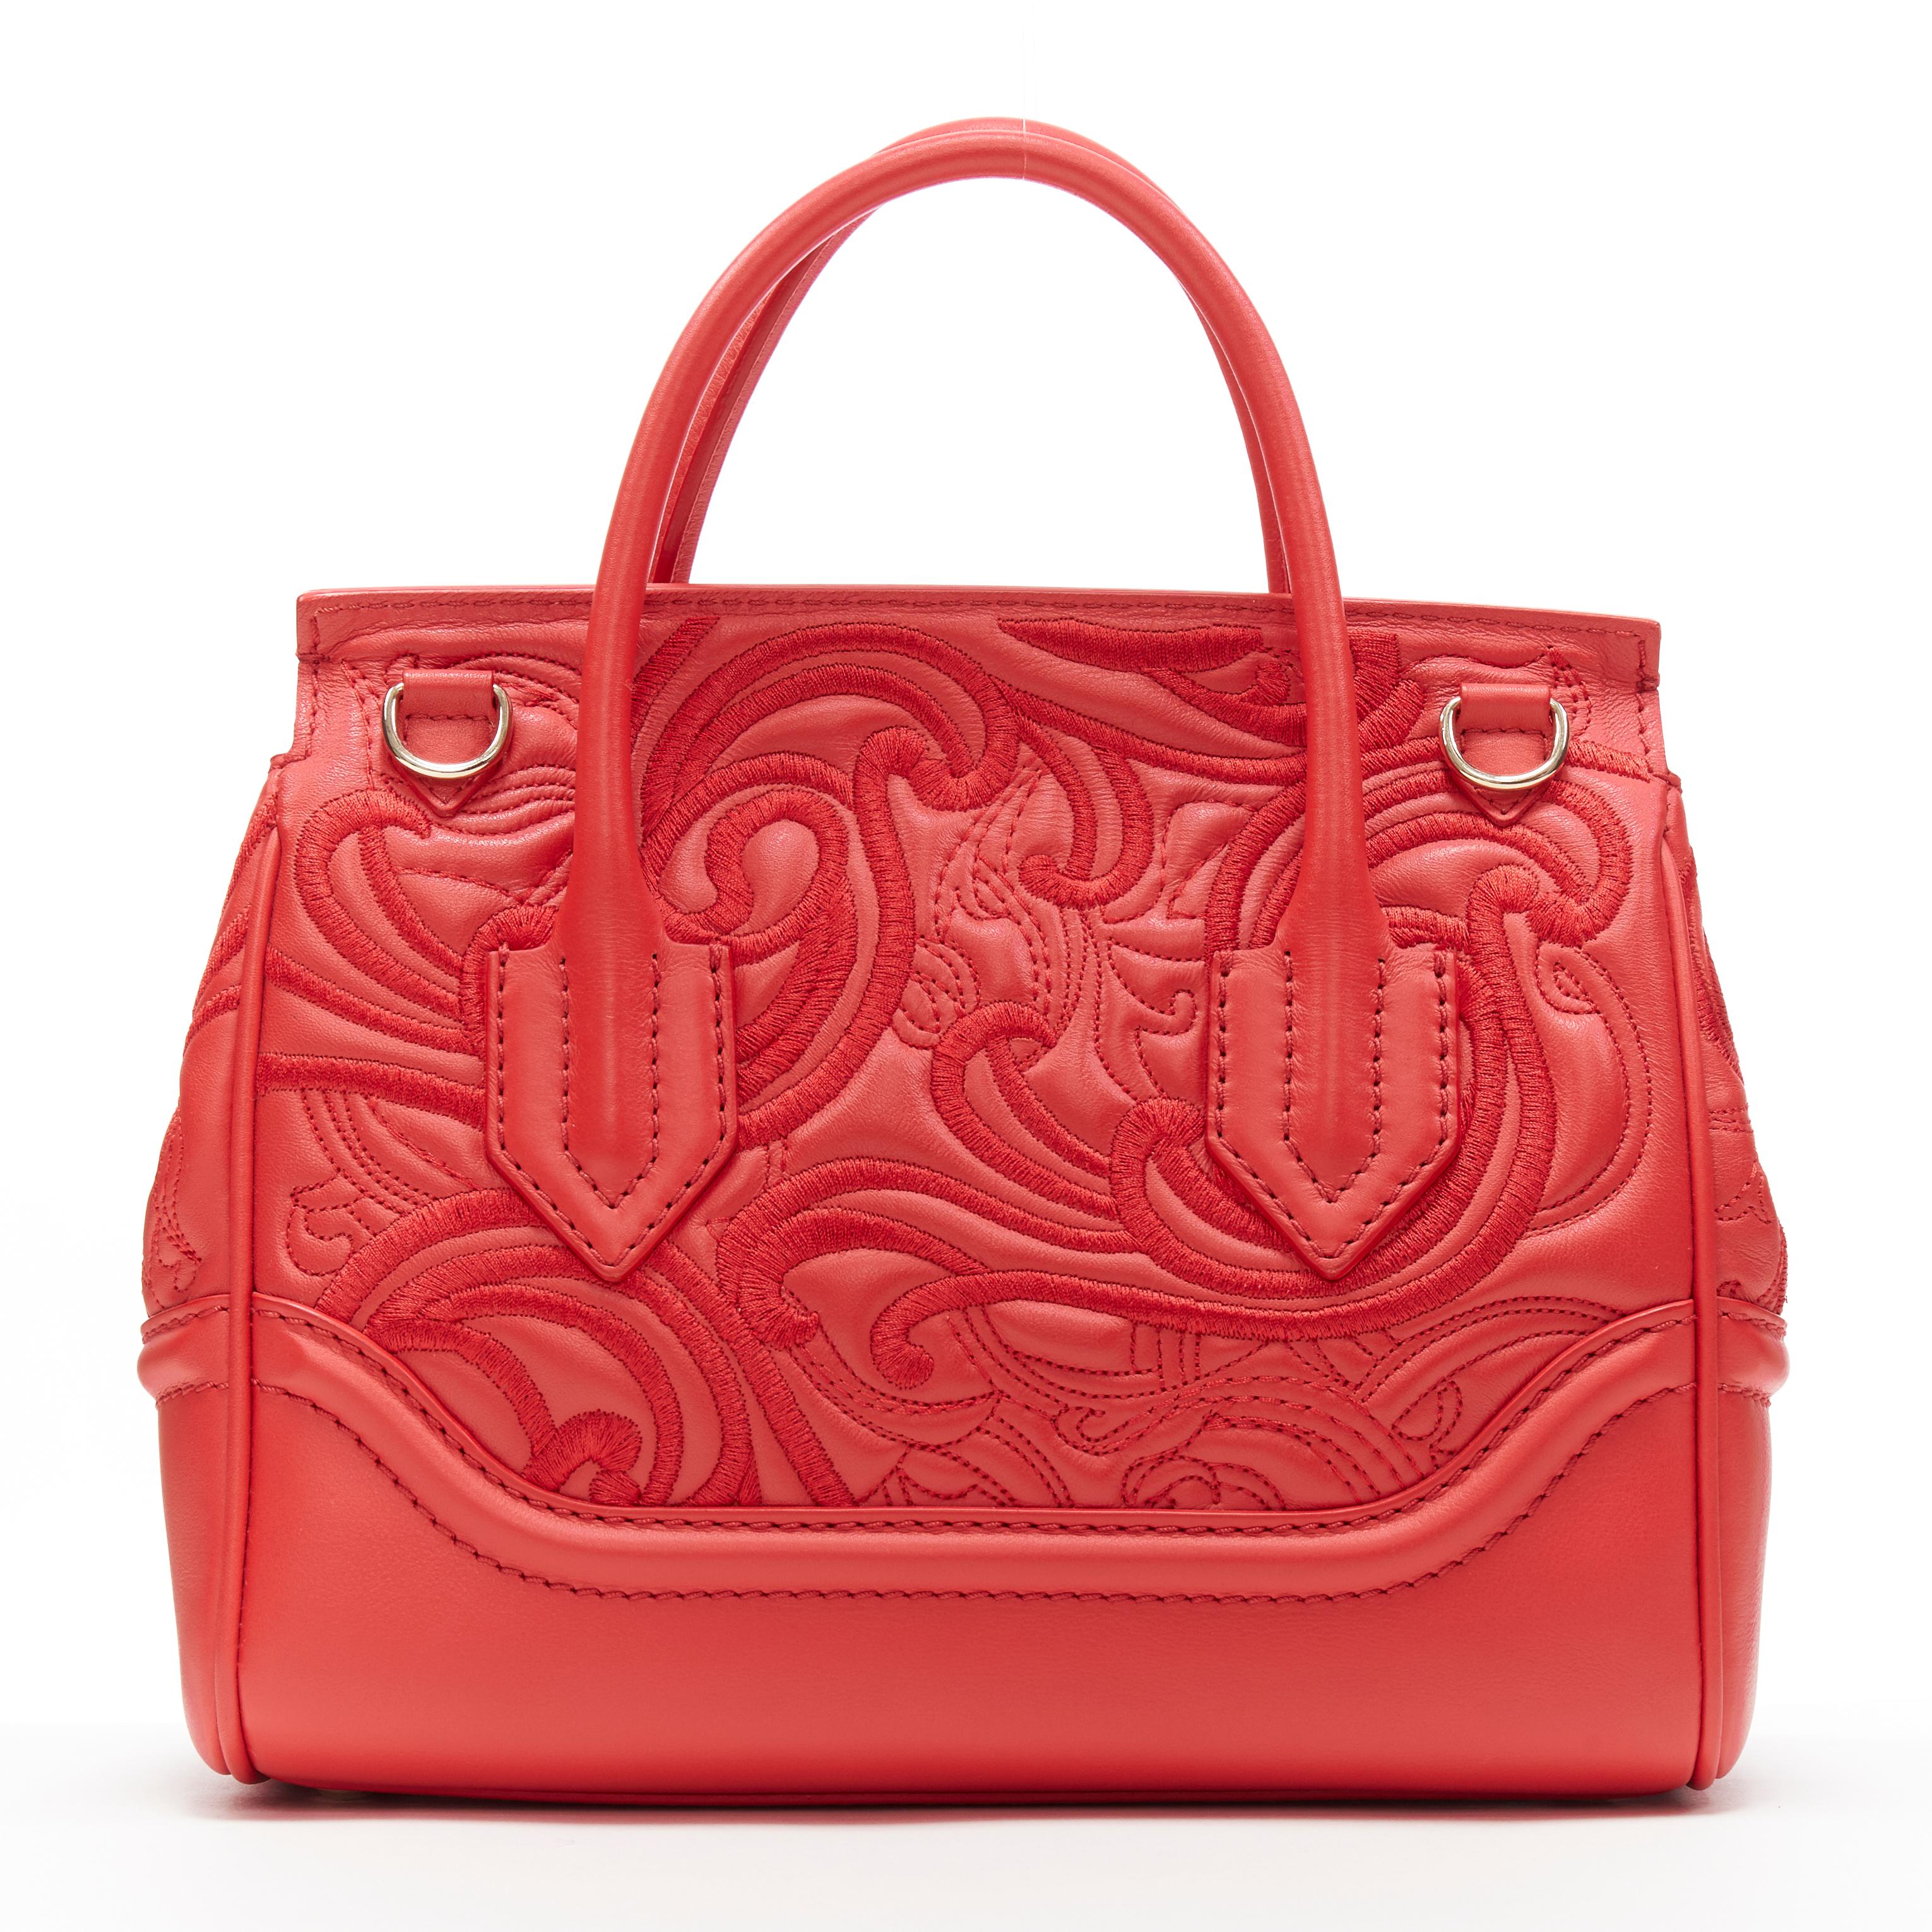 Women's new VERSACE Palazzo Empire Small Baroque Embroidery red Medusa head satchel bag